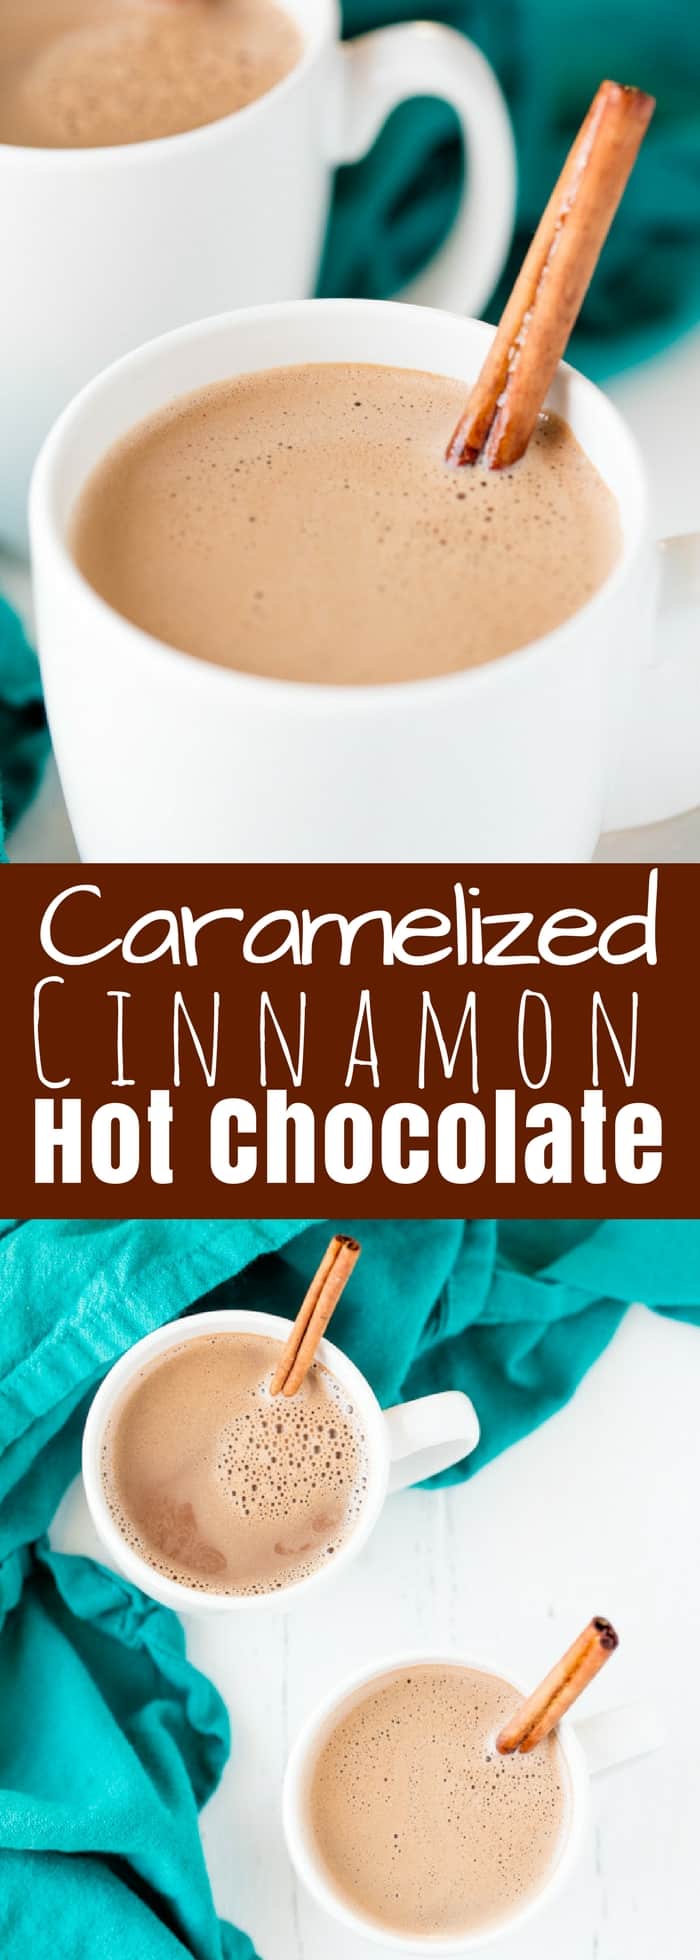 Caramelized Cinnamon Hot Chocolate is an easy to make, super indulgent, and amazingly delicious dessert. It's a sure cure for the winter blues! And who doesn't love a good homemade hot chocolate?